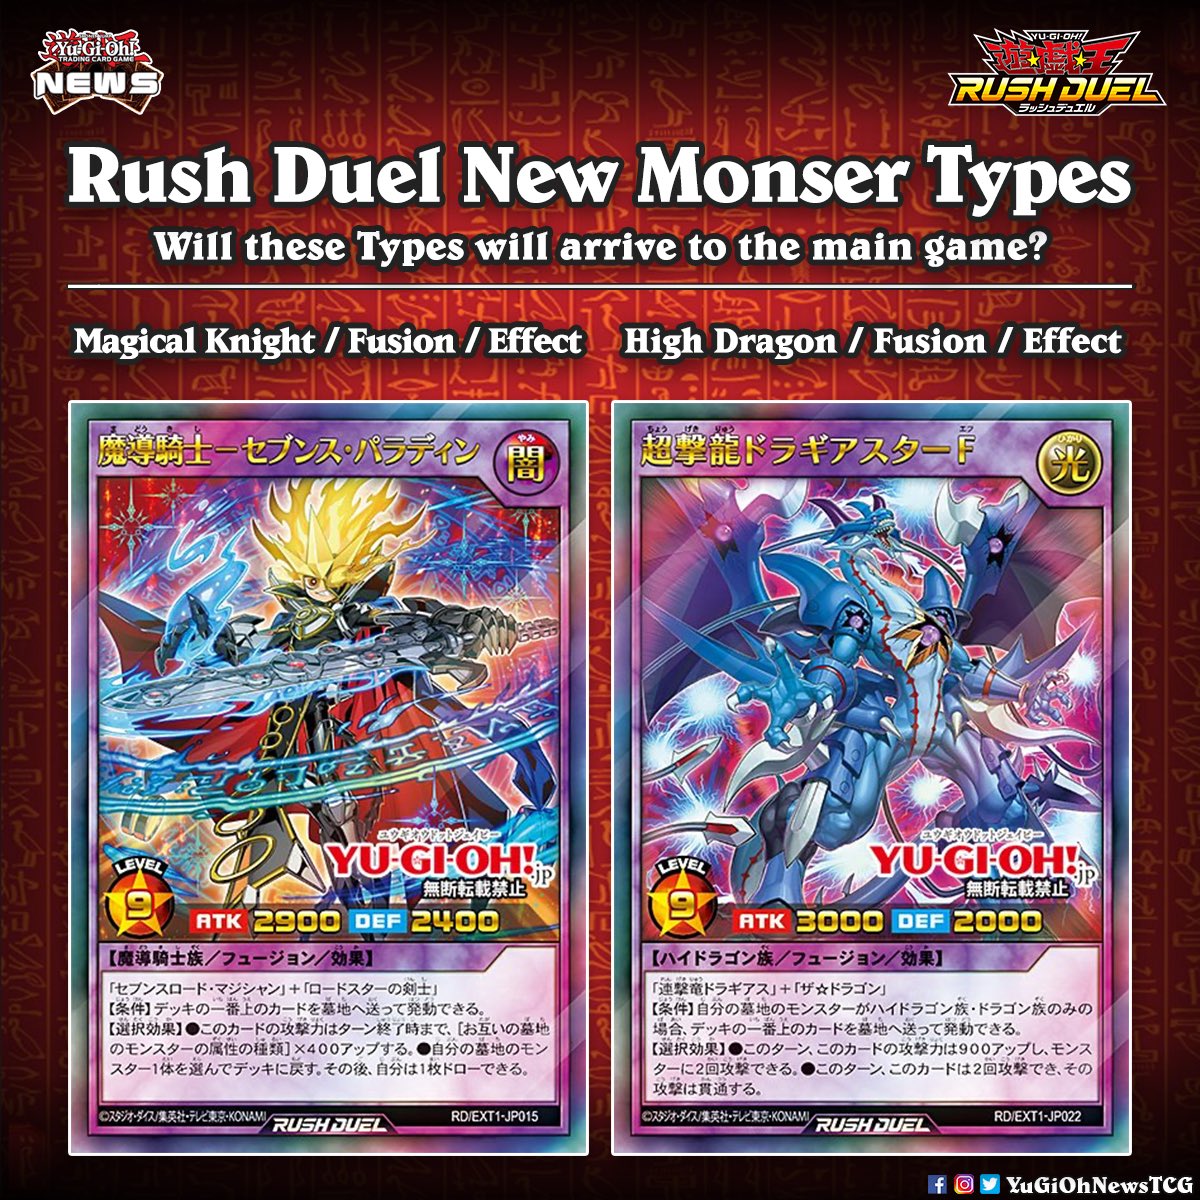 𝗥𝘂𝘀𝗵 𝗗𝘂𝗲𝗹❱ #YuGiOh Rush Duel revealed two new Types for 